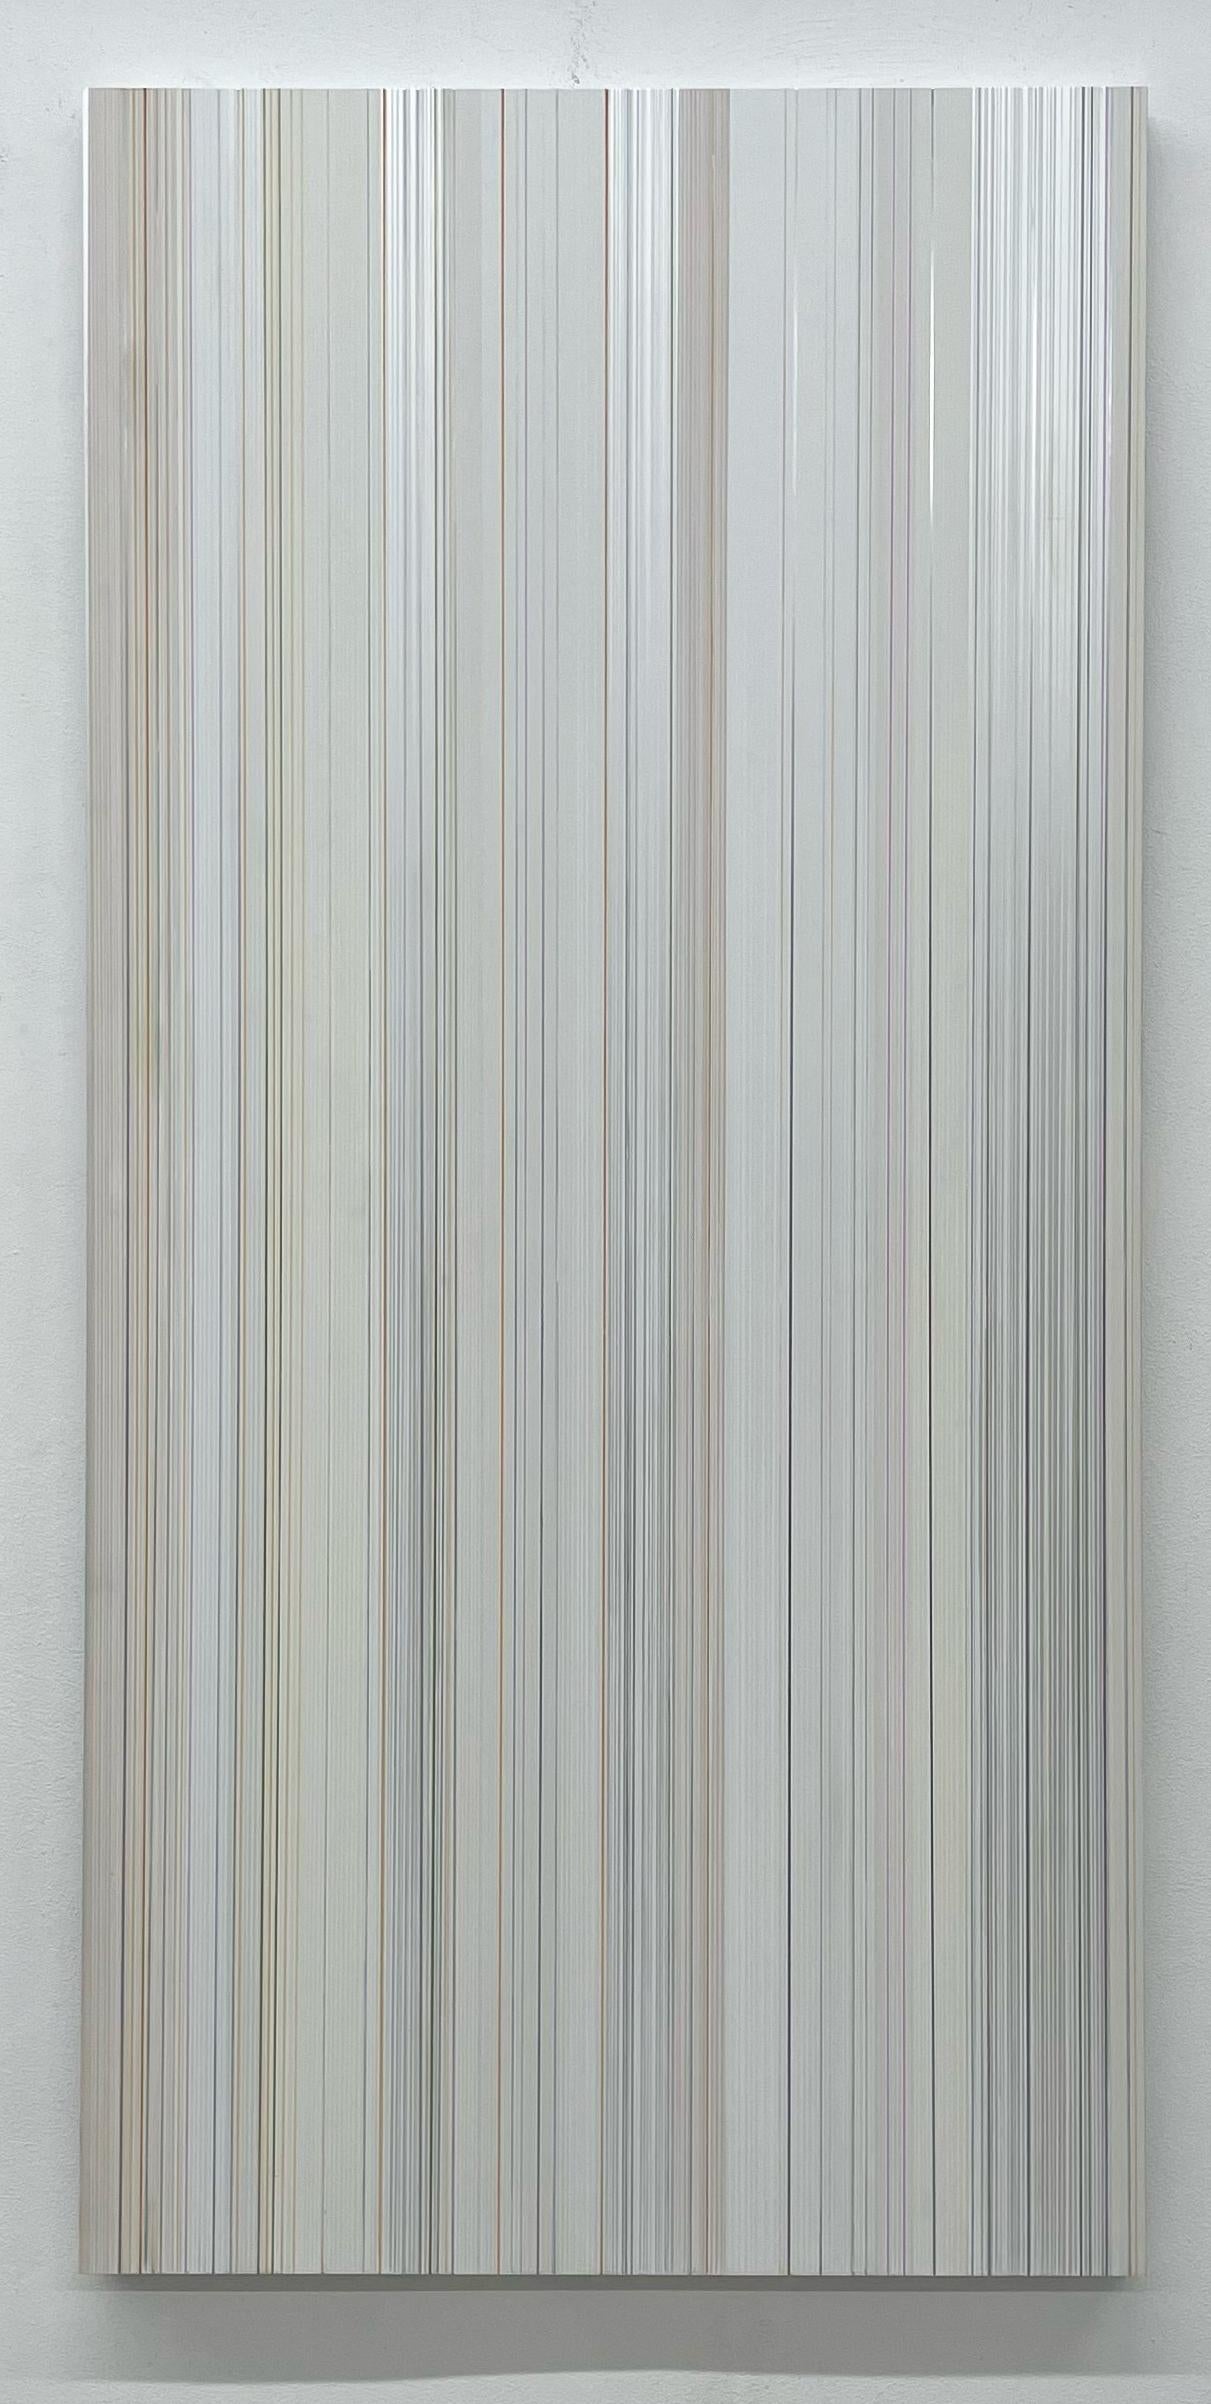 Marco Casentini Abstract Painting - What I Never Told You- monochromatic abstract stripe painting on di-bond 